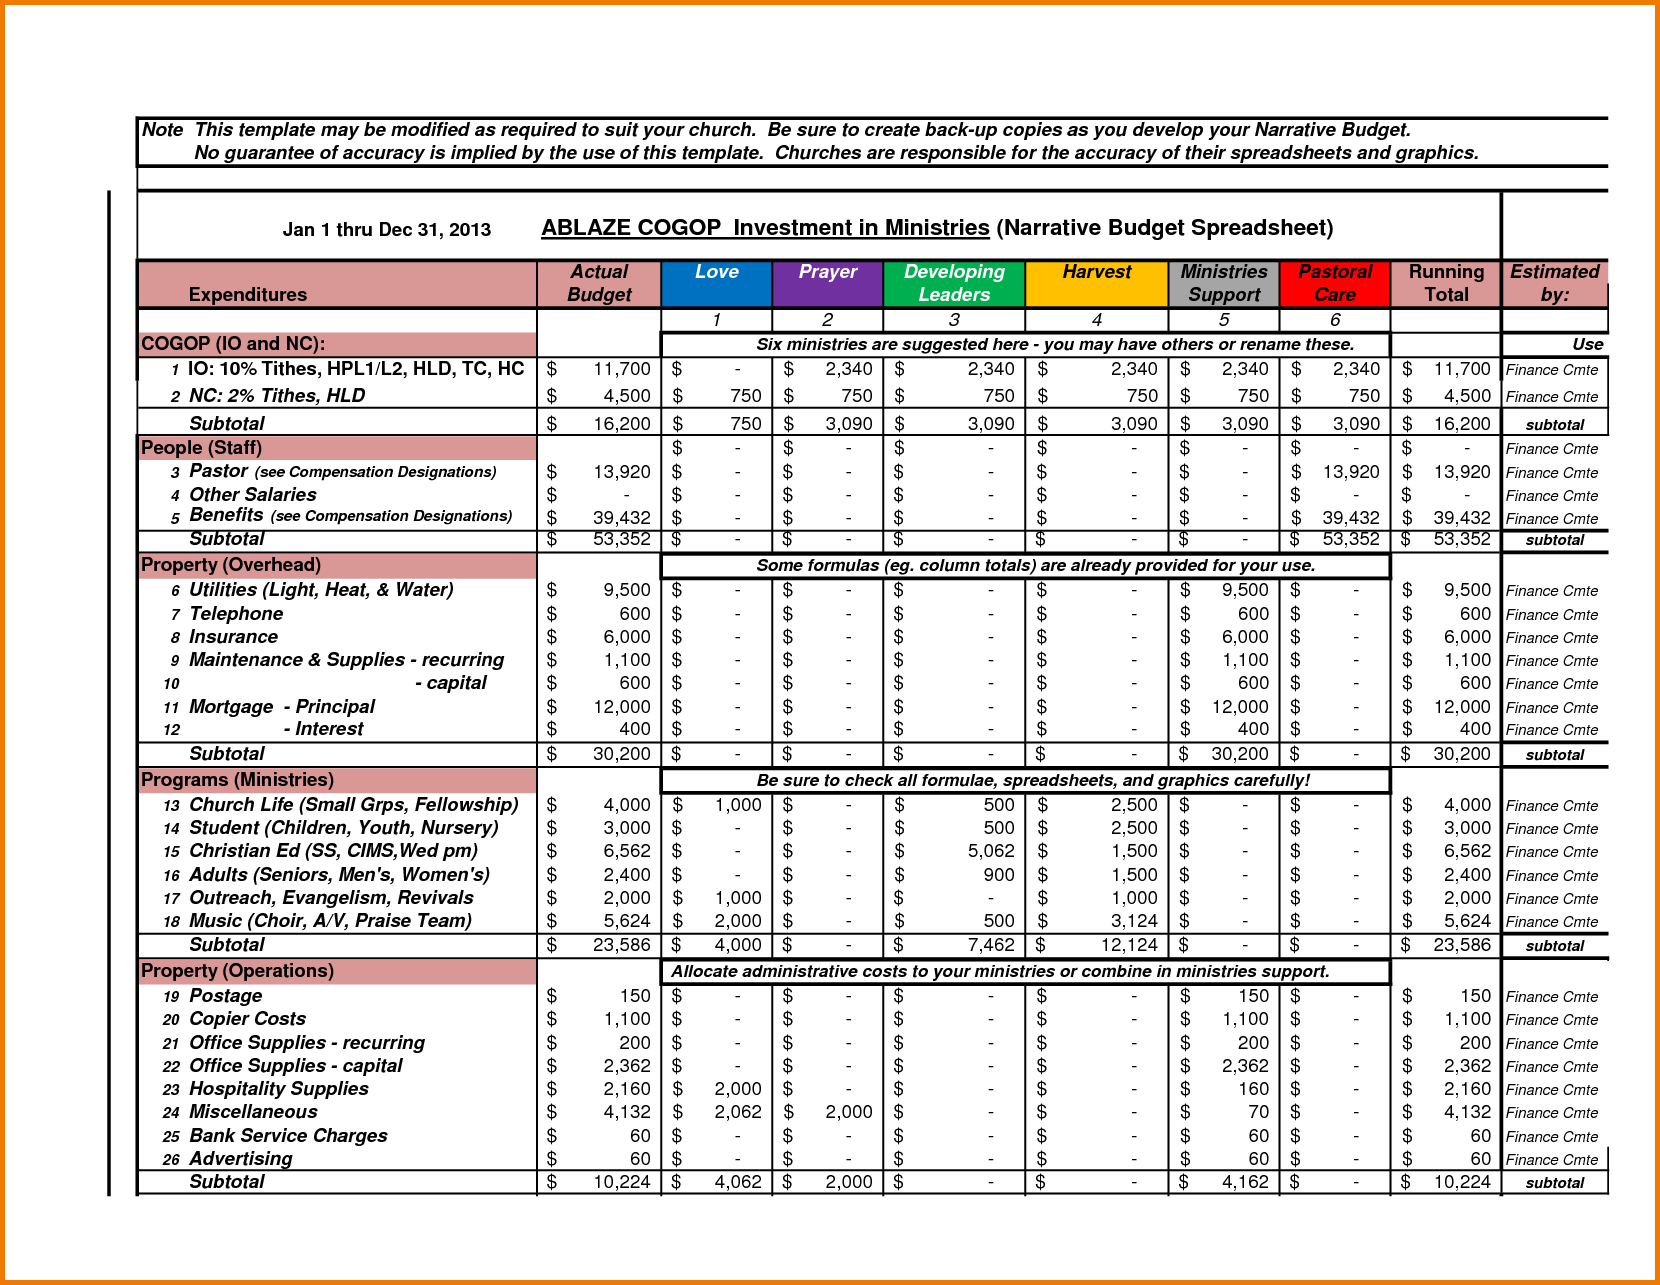 Budget Excel Spreadsheet Free Download Throughout Example Of Budget Excel Spreadsheet Free Samples Selo L Ink Co